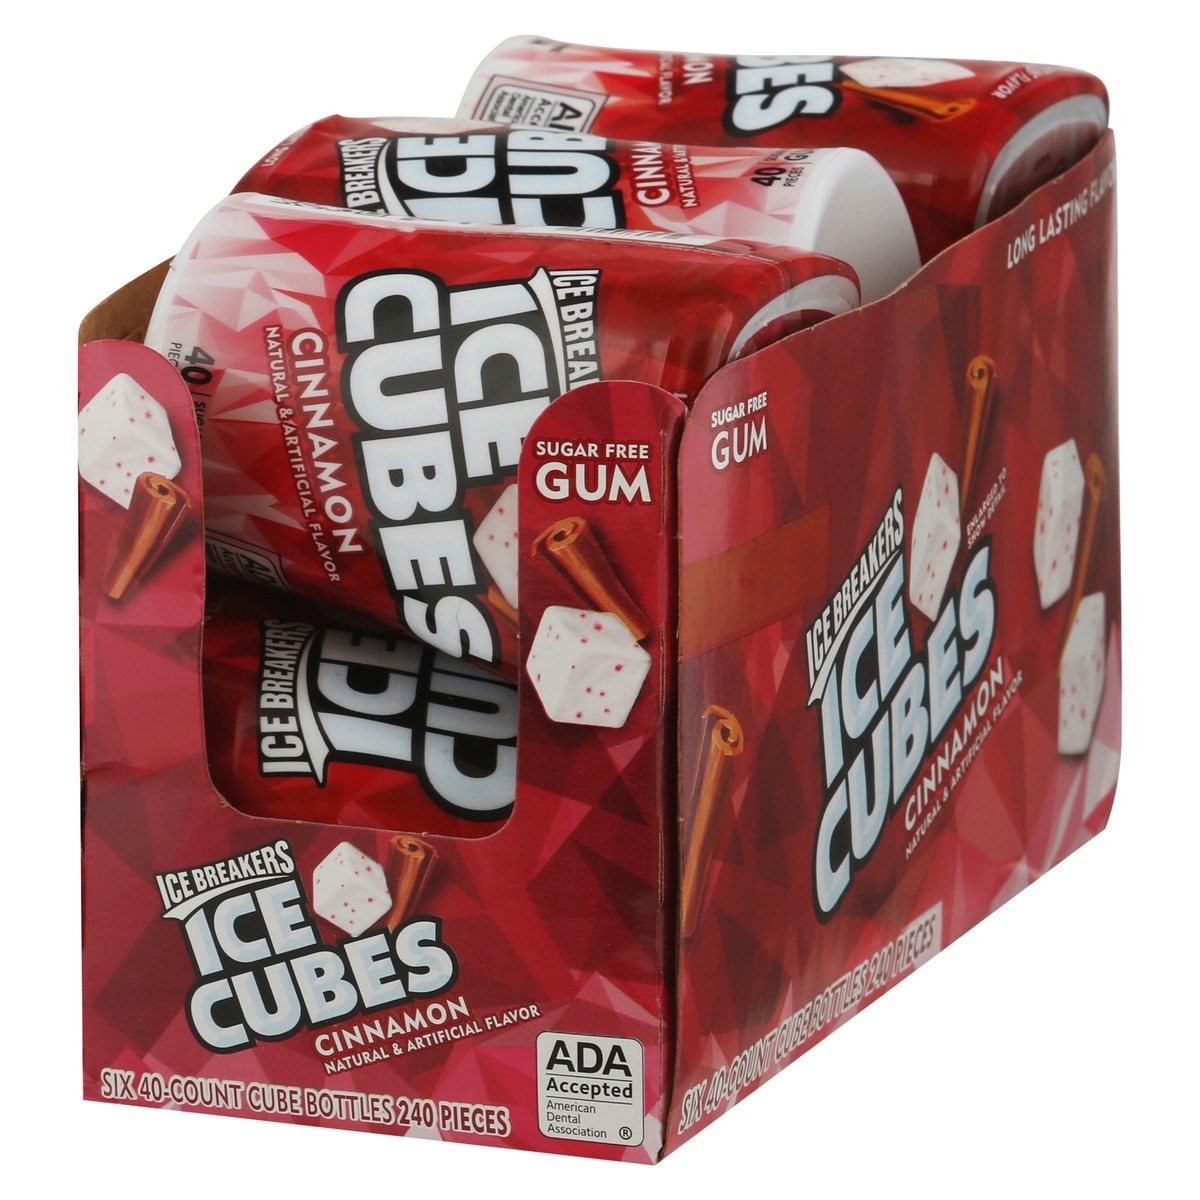 slide 9 of 9, Ice Breakers Ice Cubes Cinnamon Sugar Free Chewing Gum Bottle, 3.24 oz (40 Pieces), 3.24 oz